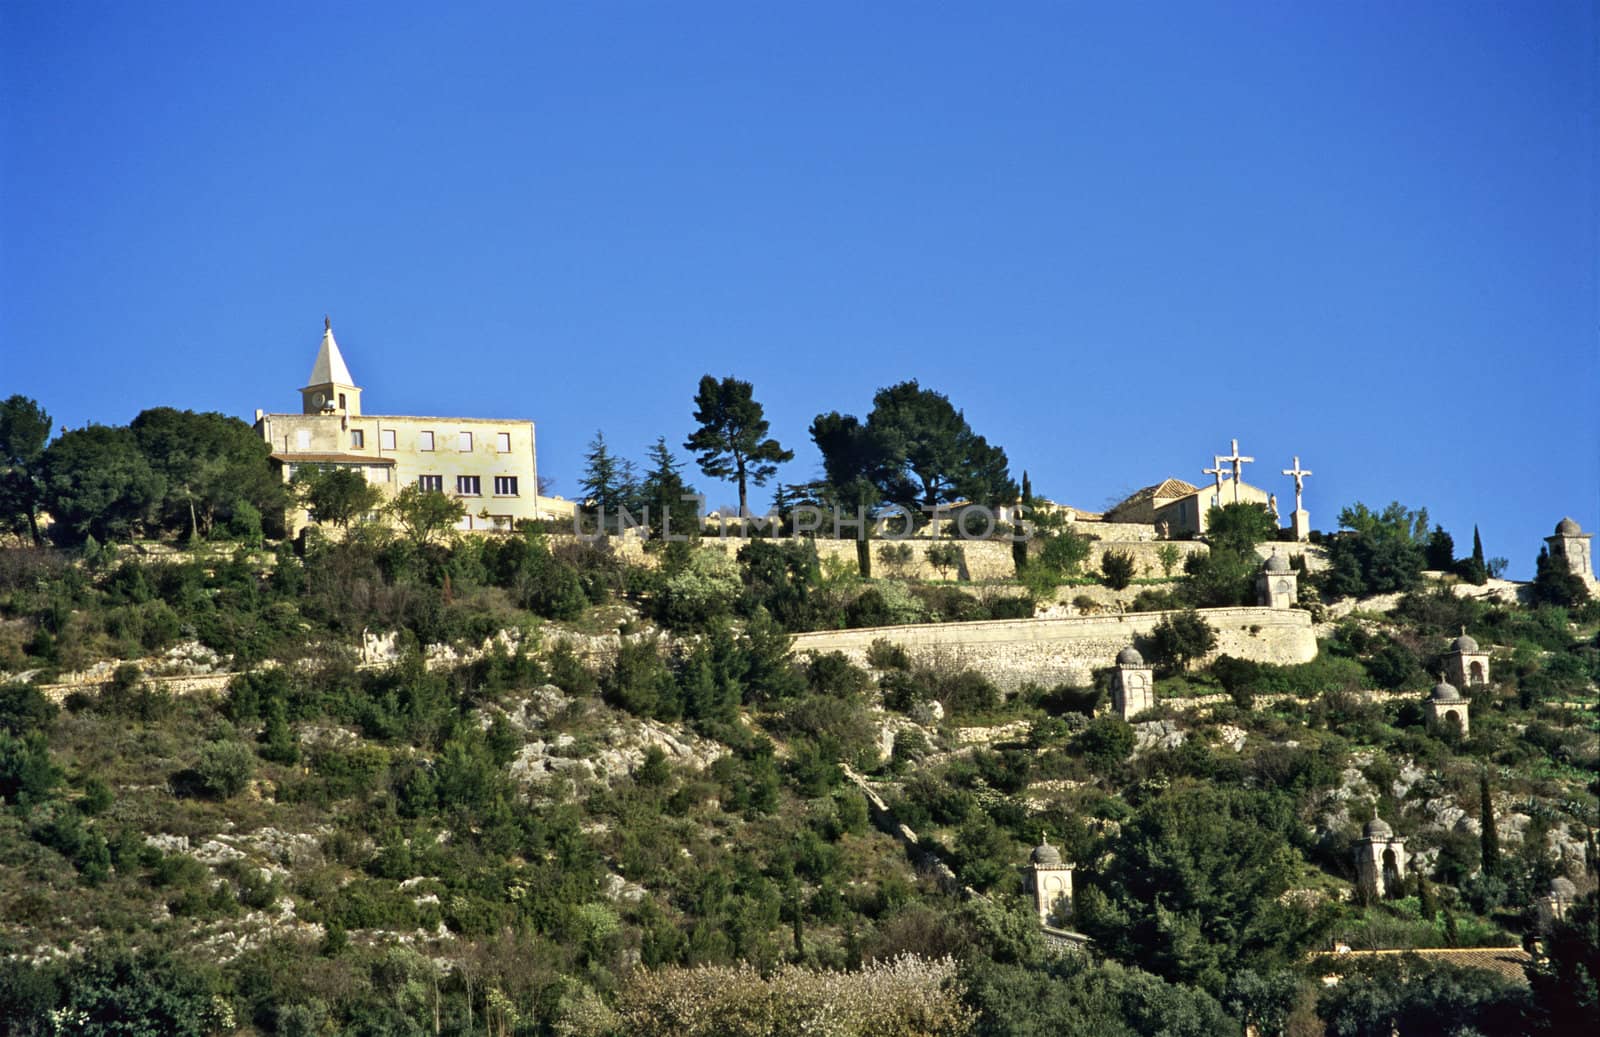 At a Monastary in the Provence region of France the faithful can follow the Stations of the Cross up the hillside